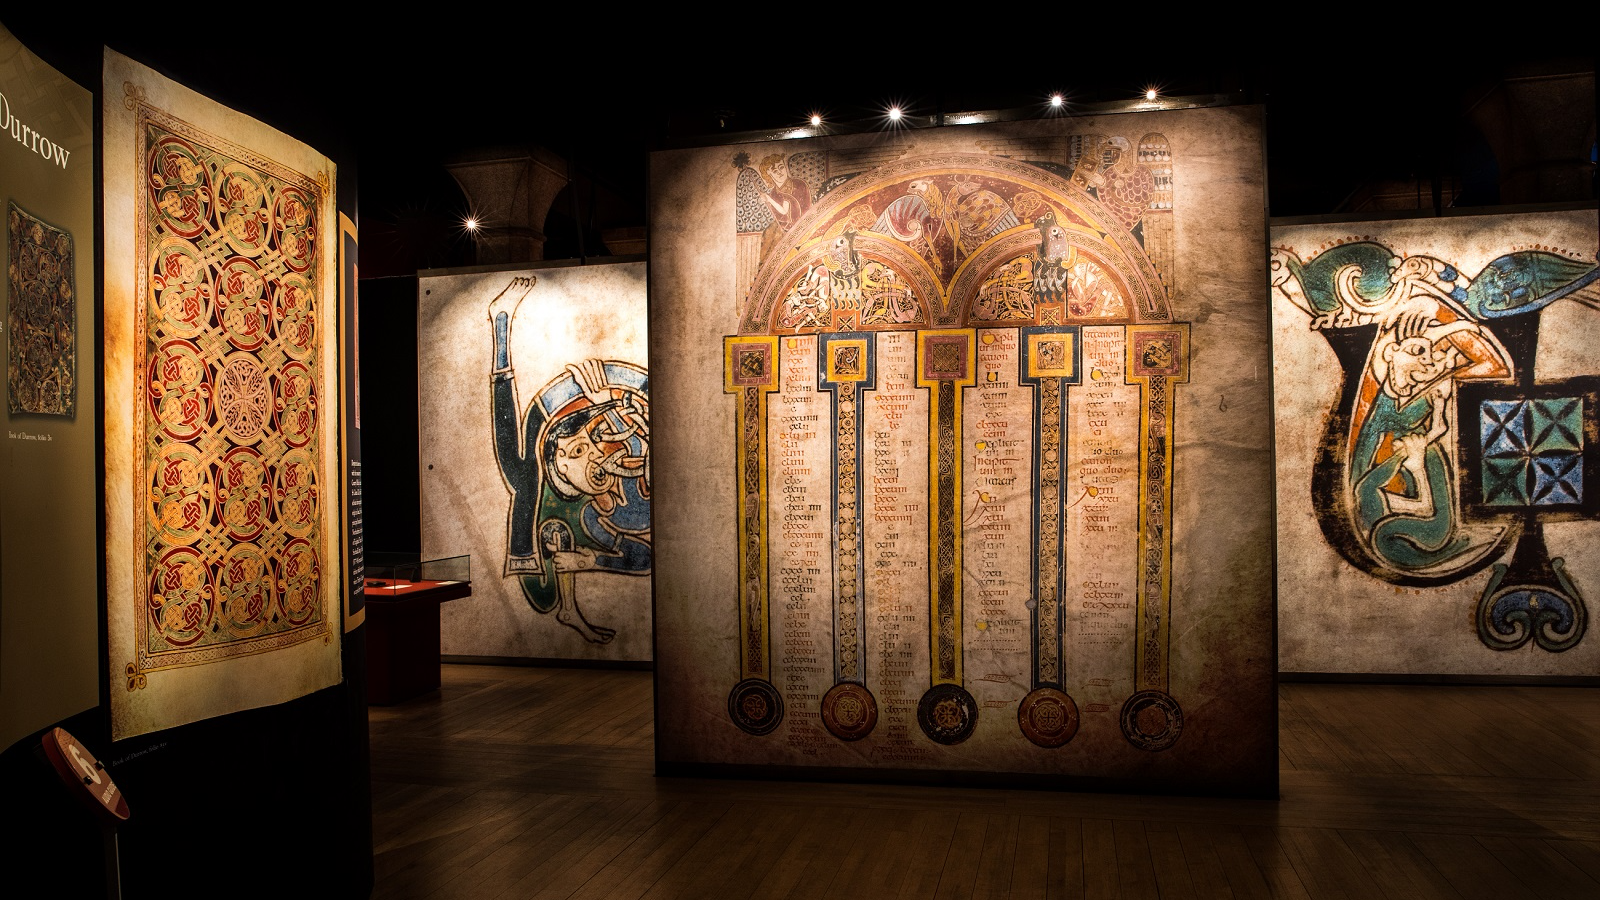 The Book of Kells at Trinity College in Dublin, Ireland